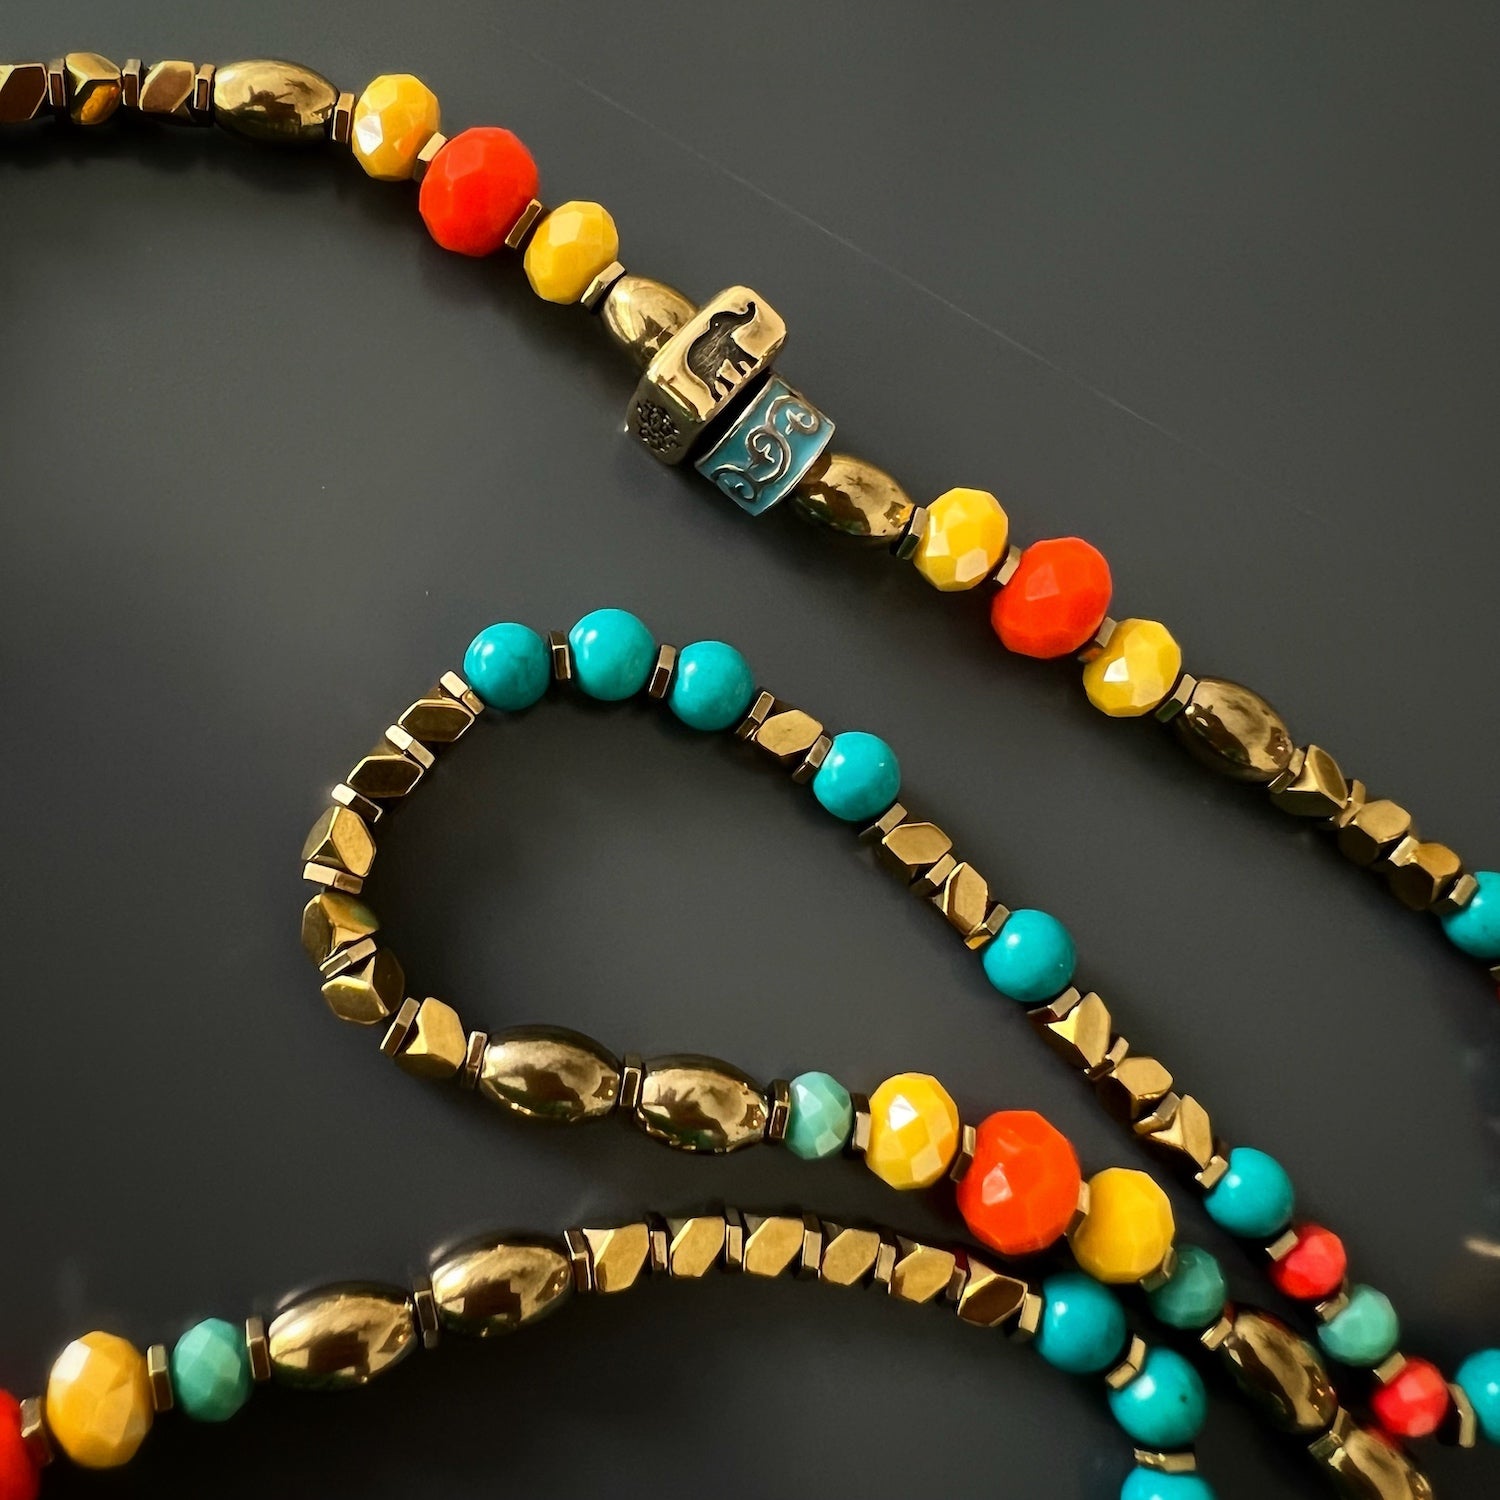 The vibrant yellow and orange crystal beads adding a playful touch to the Turquoise Blue Elephant Necklace